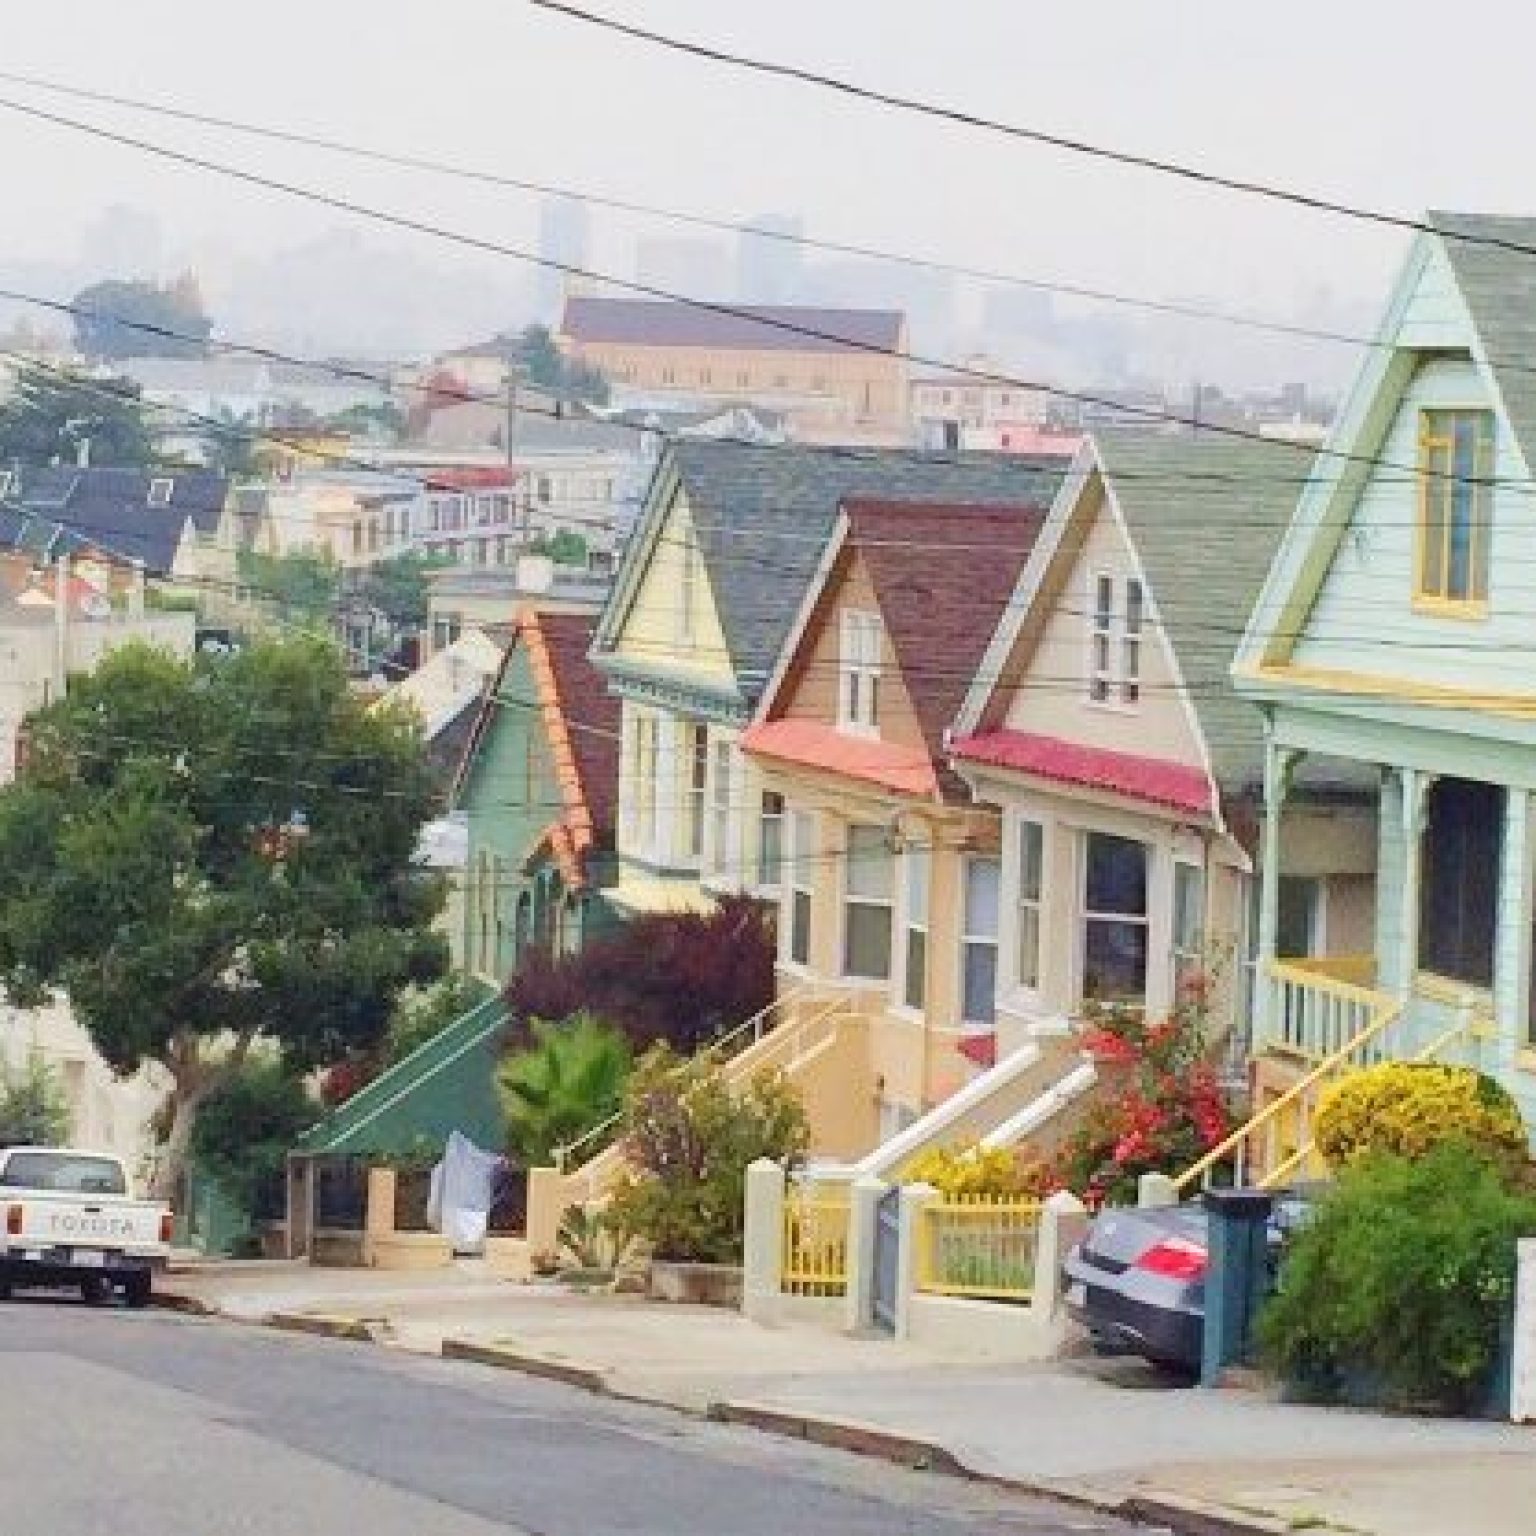 charming houses line a street in san fran t20 GR0Gy6 e1671808833558 Behind Panasonic’s Commitment to Sustainable Change Across the Globe